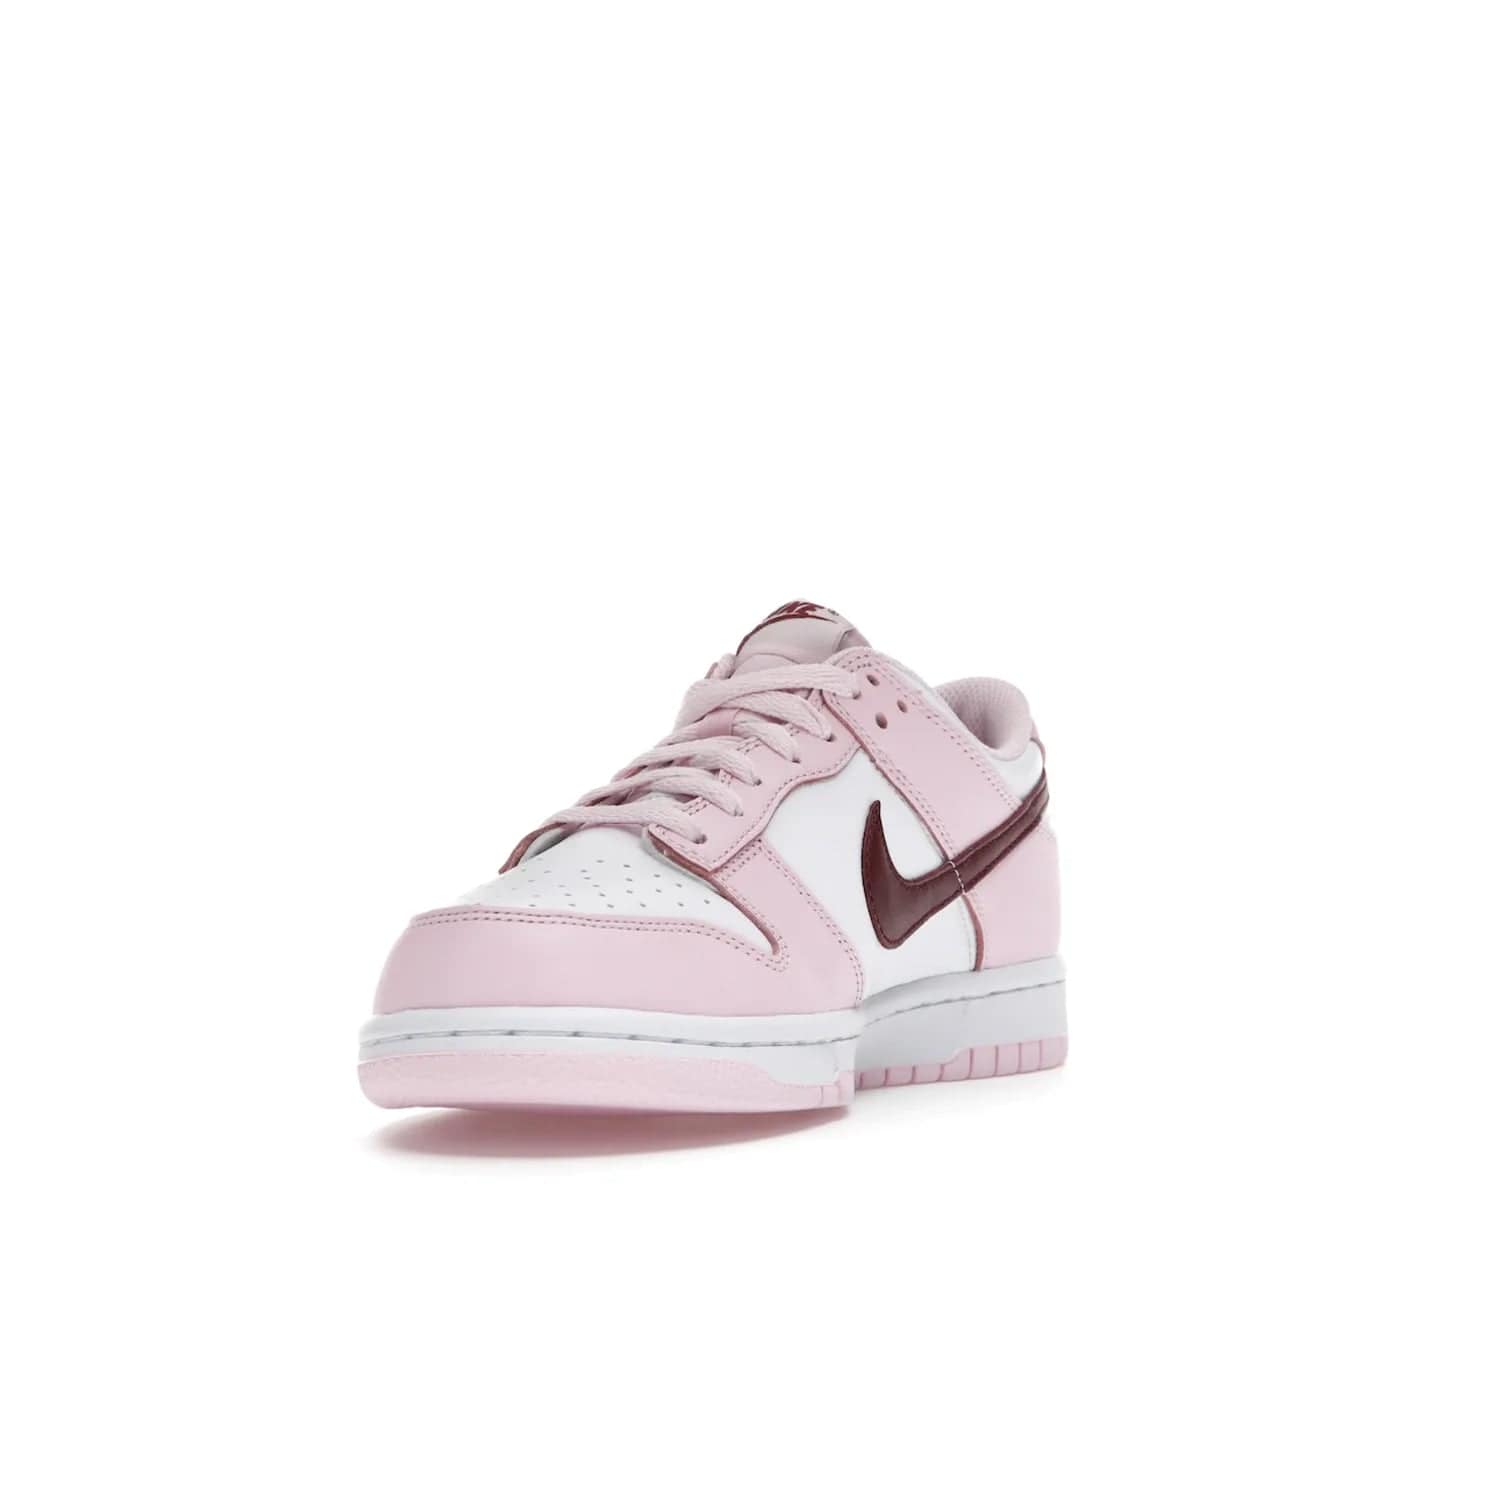 Nike Dunk Low Pink Foam Red White (GS) - Image 13 - Only at www.BallersClubKickz.com - #
Introducing the daring and stylish Nike Dunk Low Pink Foam Red White (GS) sneaker for grade schoolers. White leather with pink overlays and Dark Beetroot accents, classic Nike Dunk midsole and pink outsole. Released August 2021 for $85.